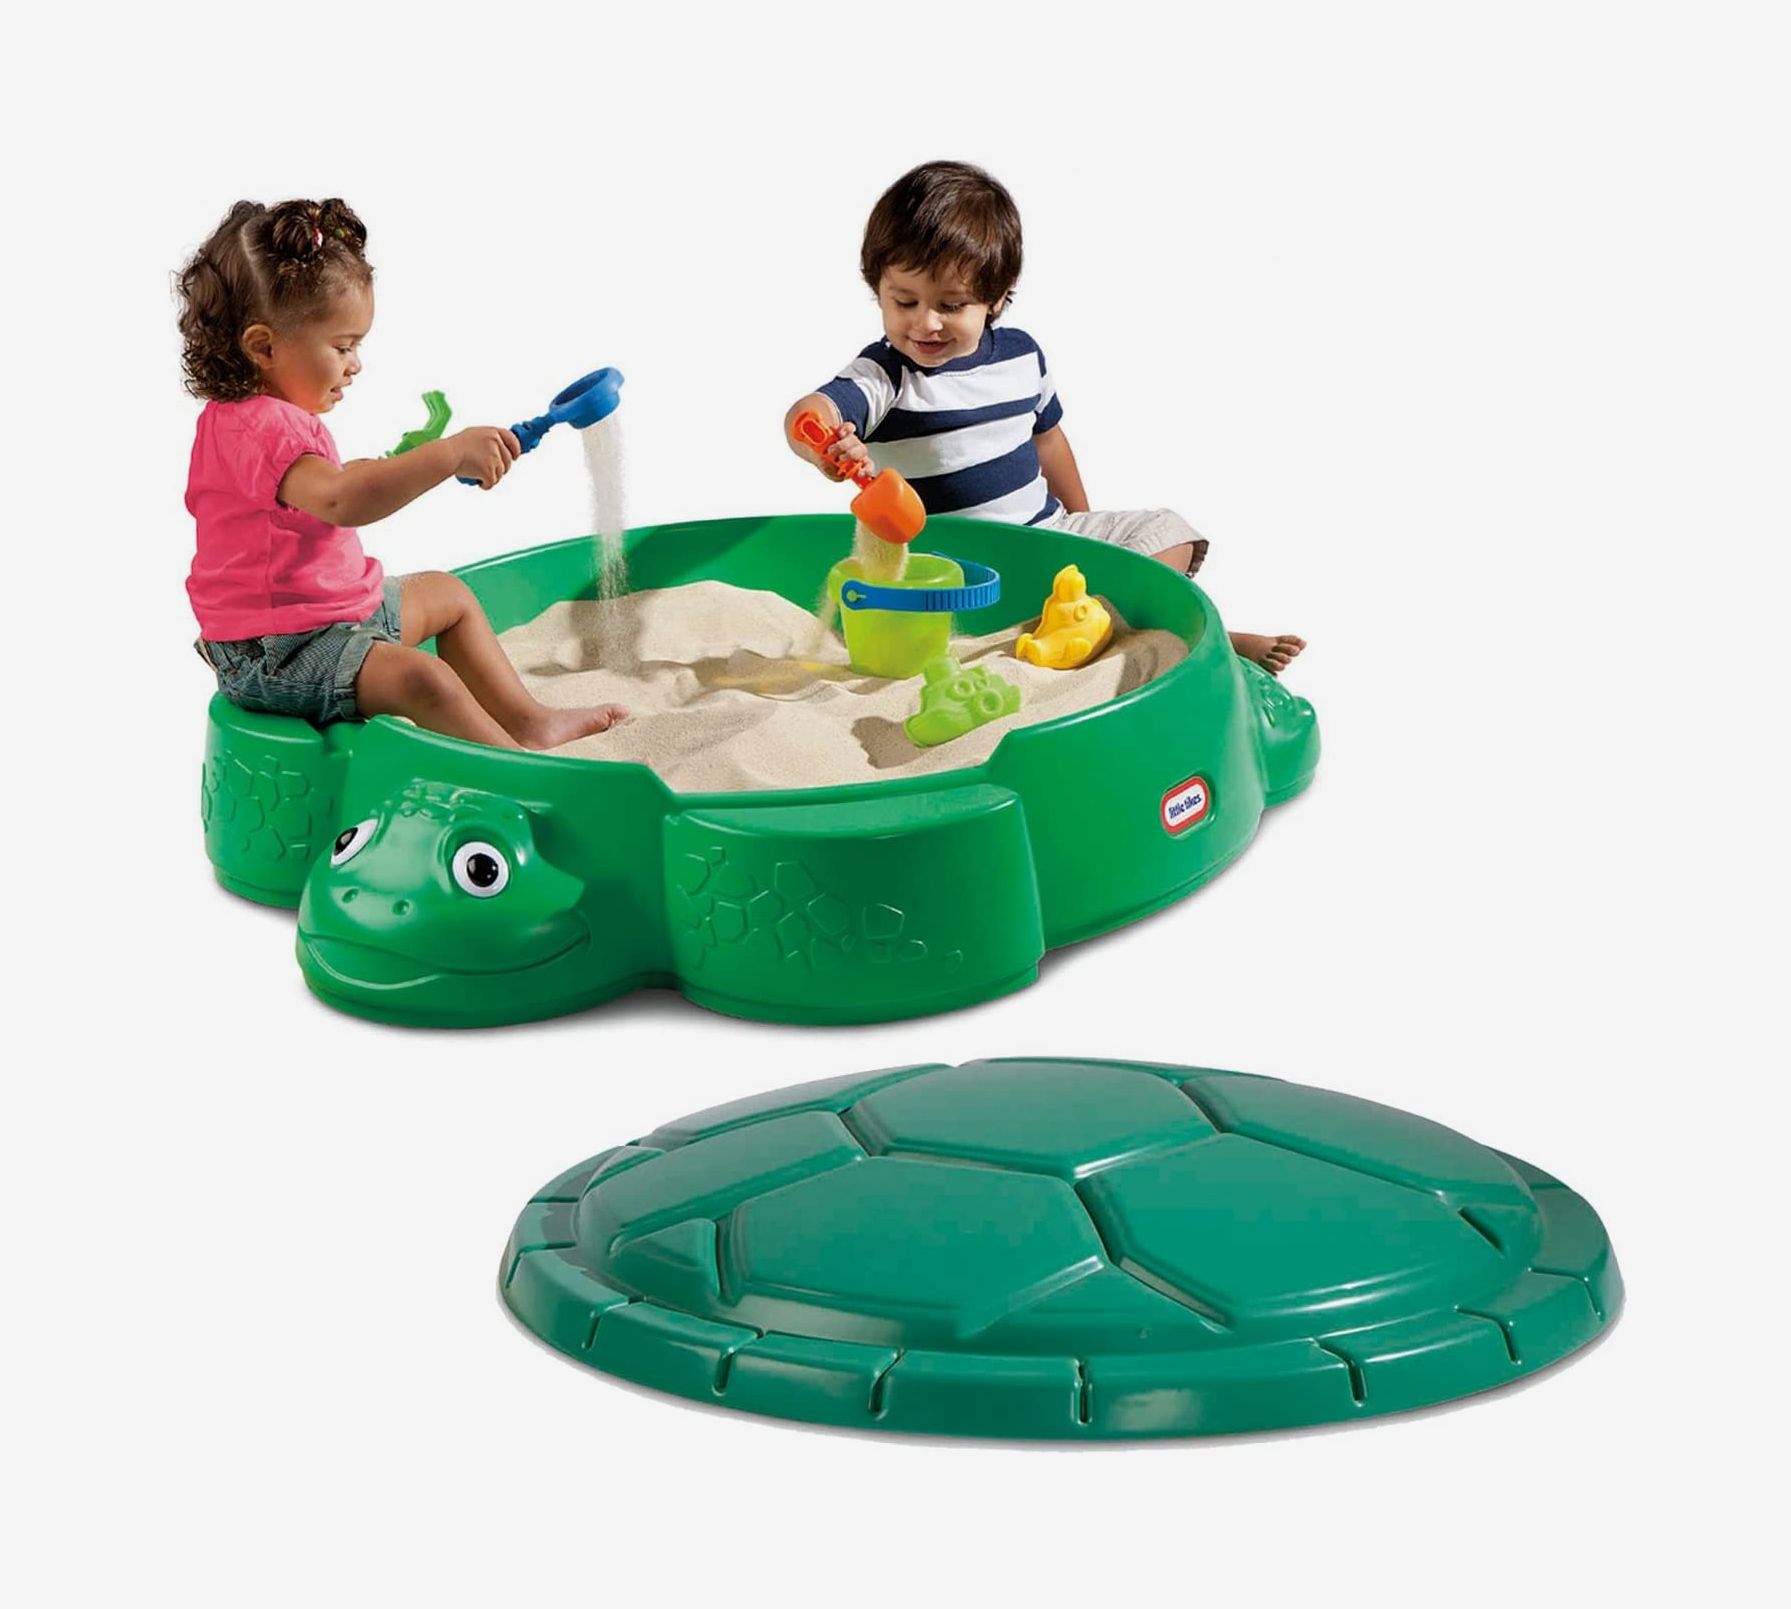 38 Best Outdoor Toys for Kids 2022 | The Strategist